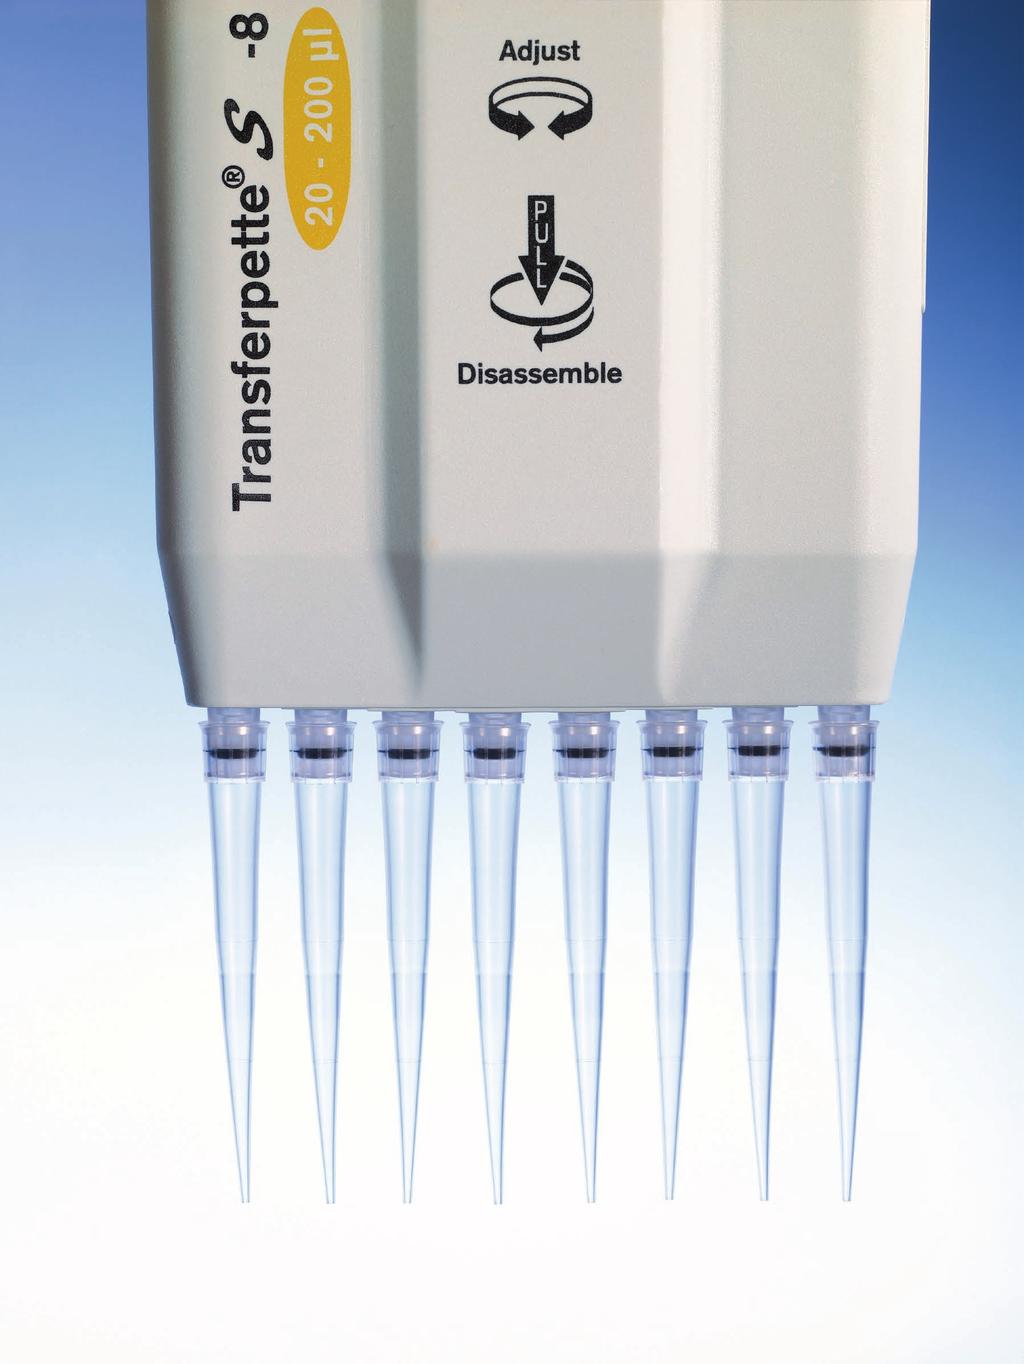 PLASTIBRAND Filter Tips non- self- sealing Filter tips are especially suited for working with PCR techniques, and fully meet the requirements for microbiology and radioisotope work.